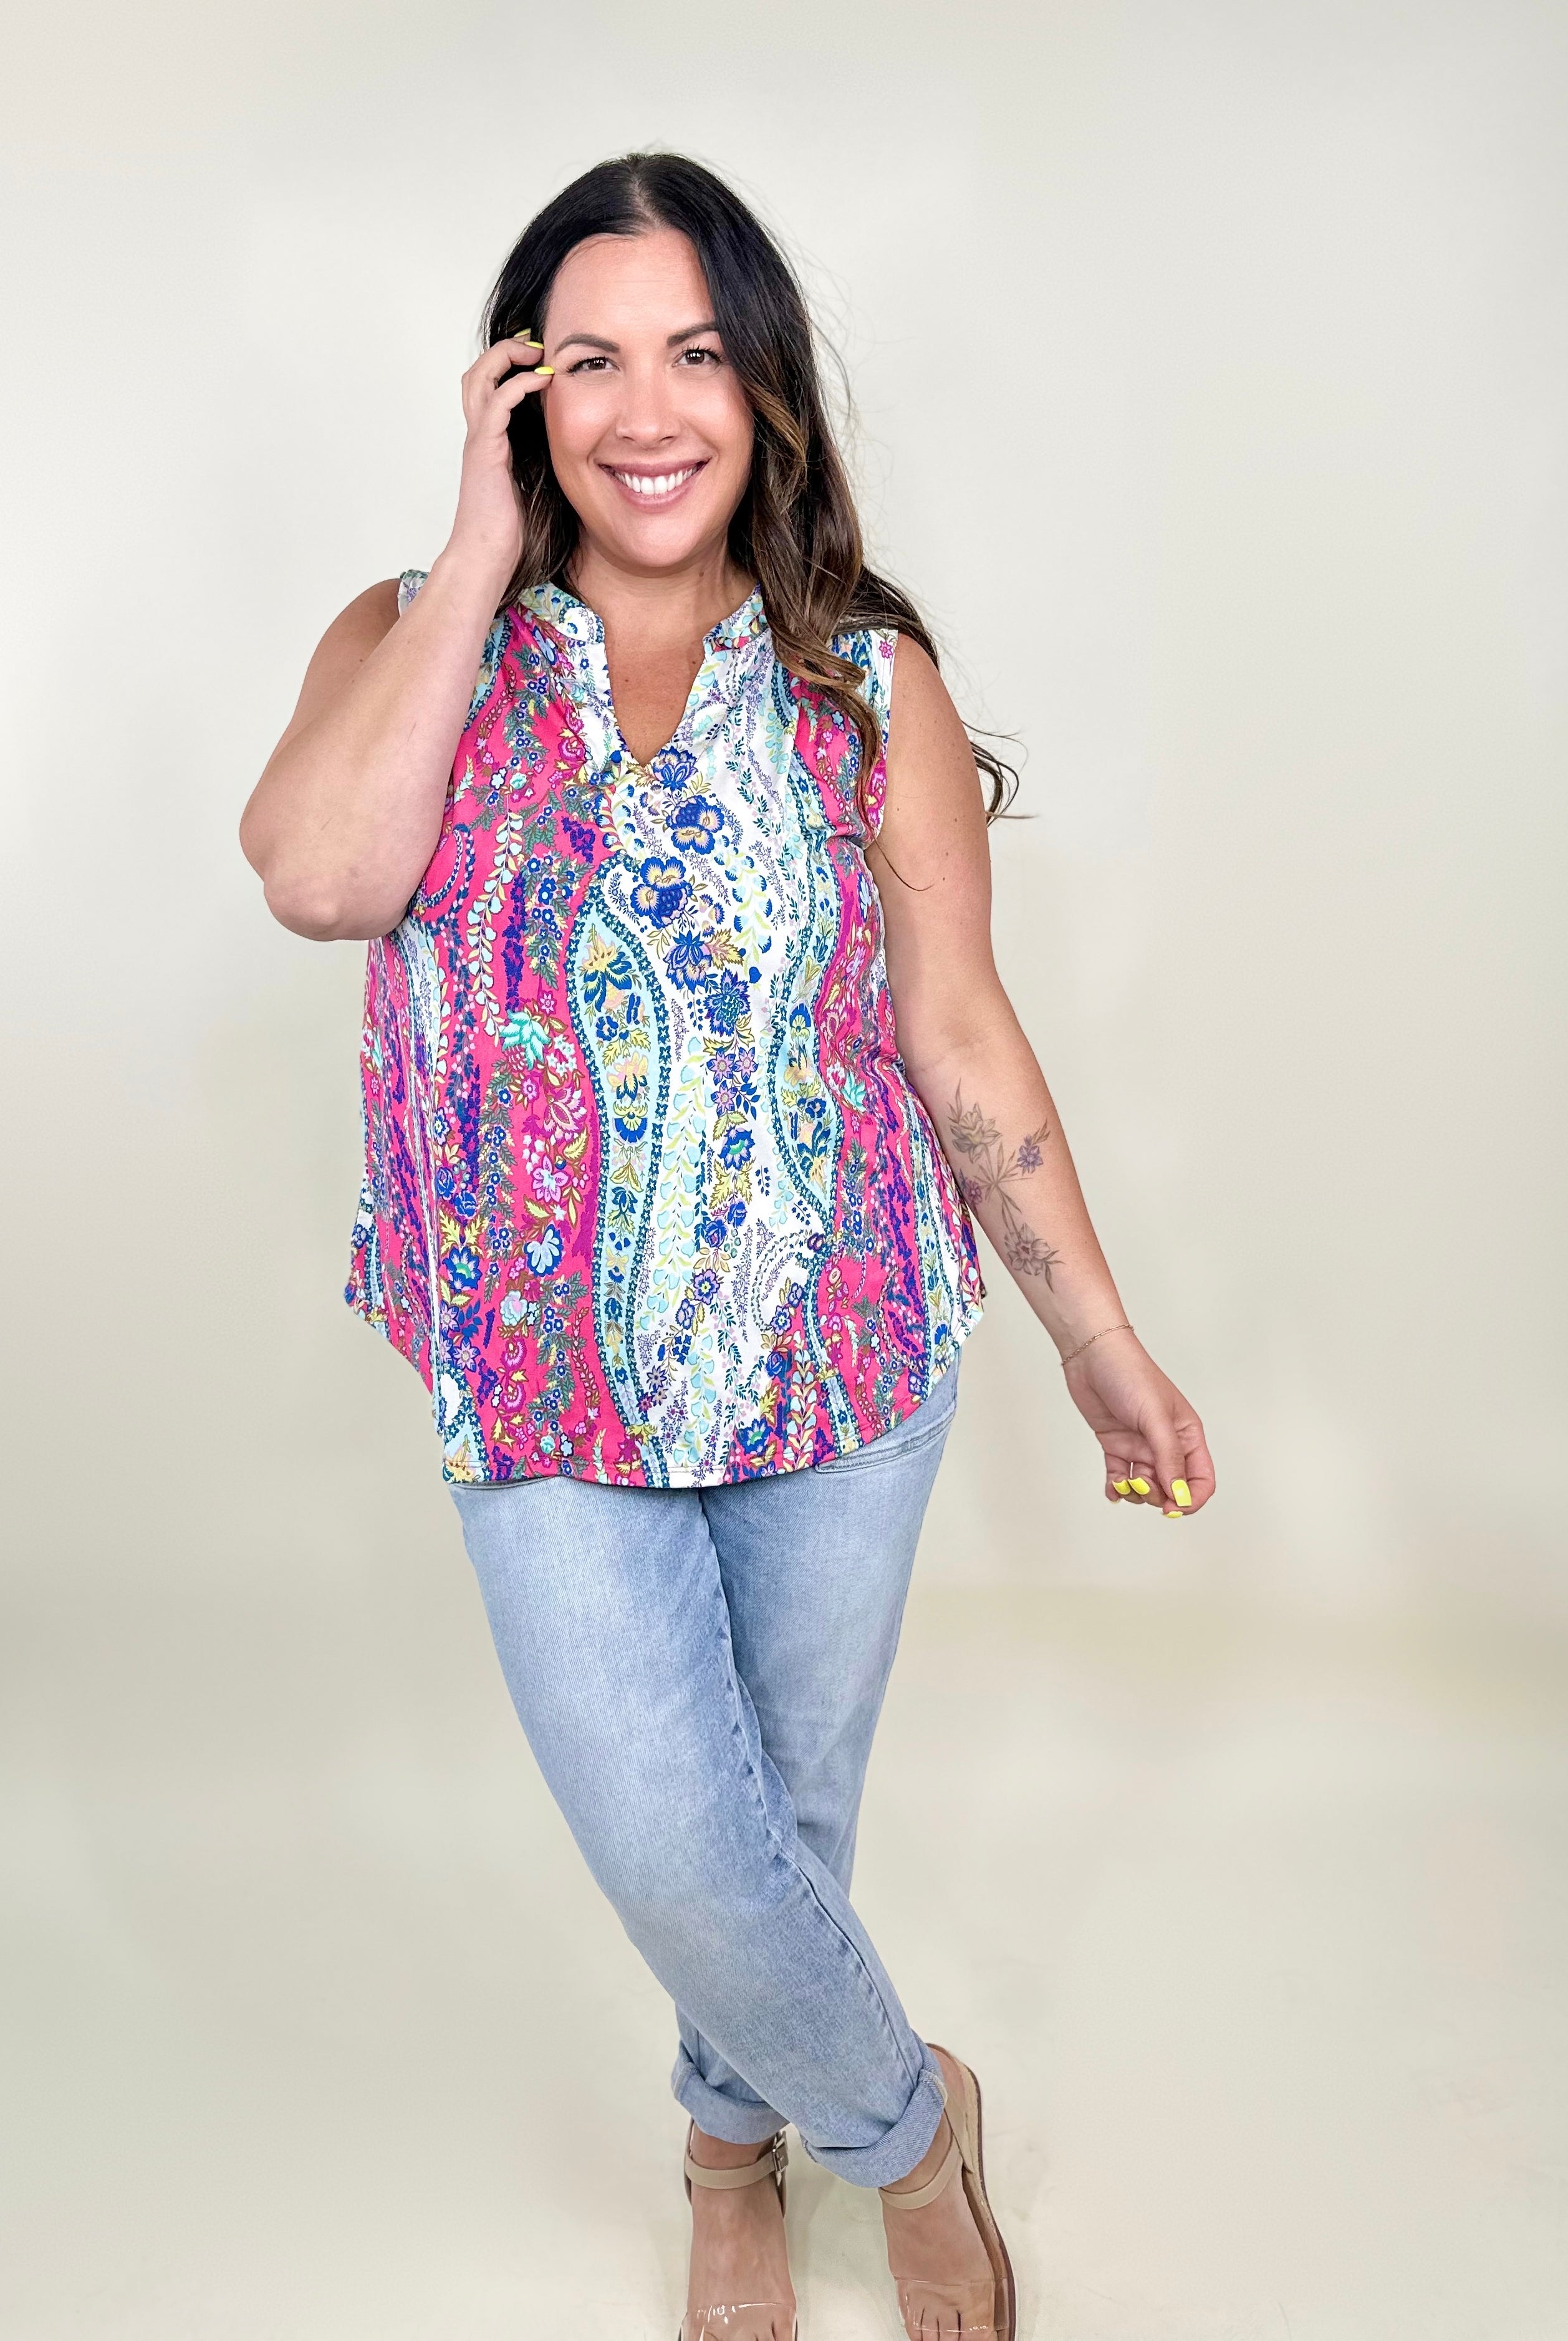 The Good Life Top-110 Short Sleeve Top-White Birch-Heathered Boho Boutique, Women's Fashion and Accessories in Palmetto, FL